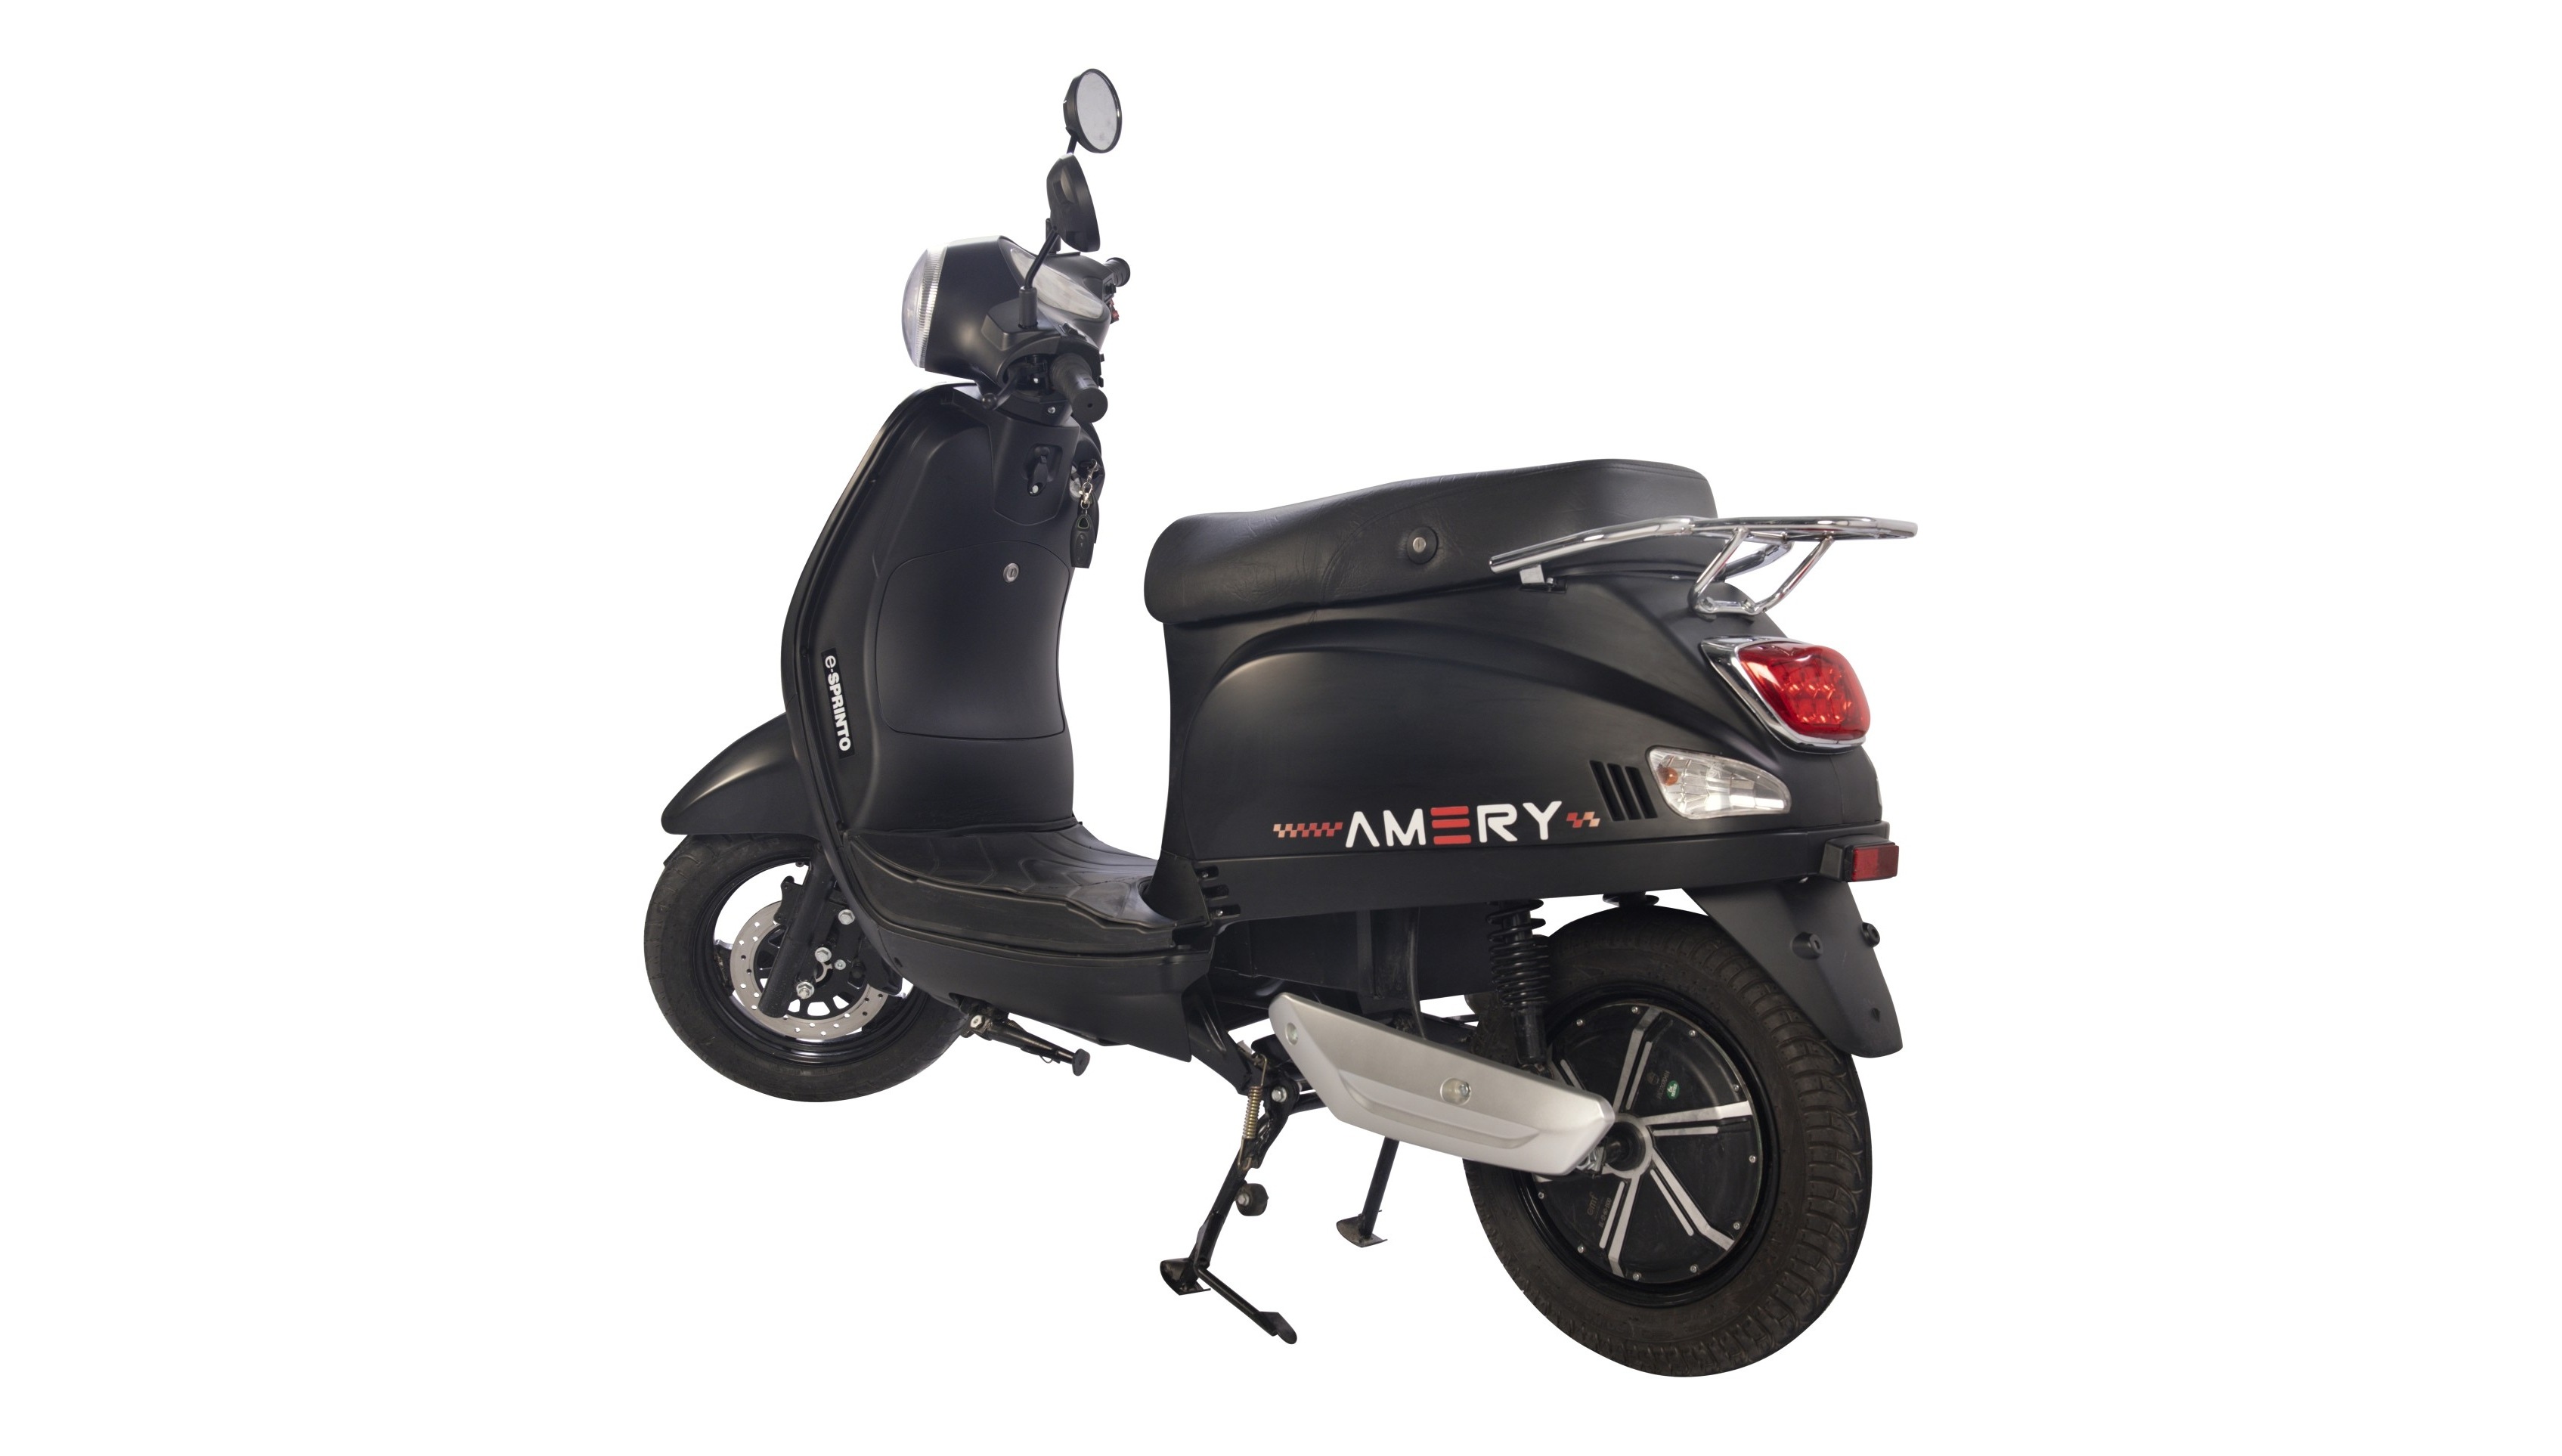 The eSprinto Amery electric scooter is powered by a 2500 BLDC hub motor and weighs just 98 kg 